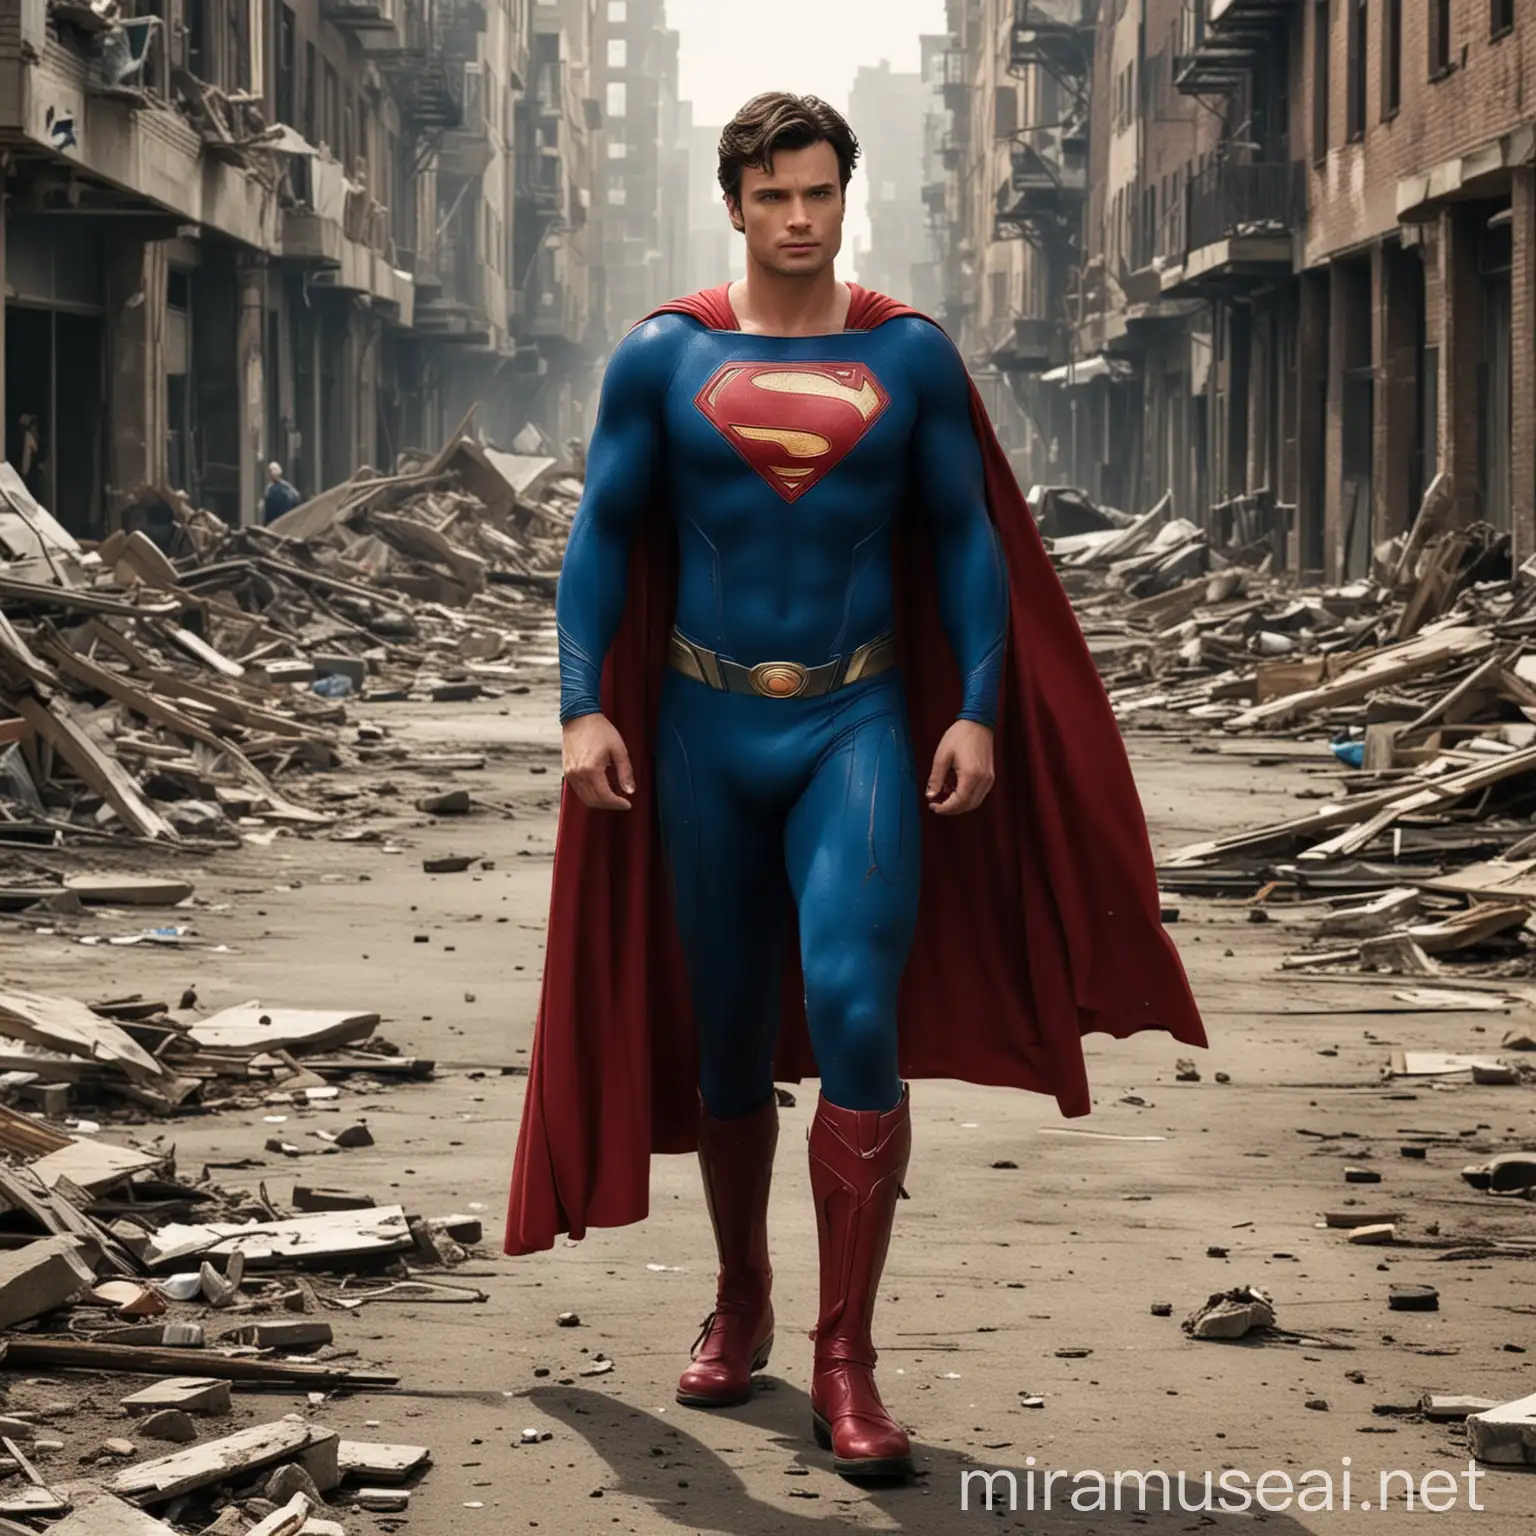 Tom Welling in Modern Superman Suit Standing in Destroyed City